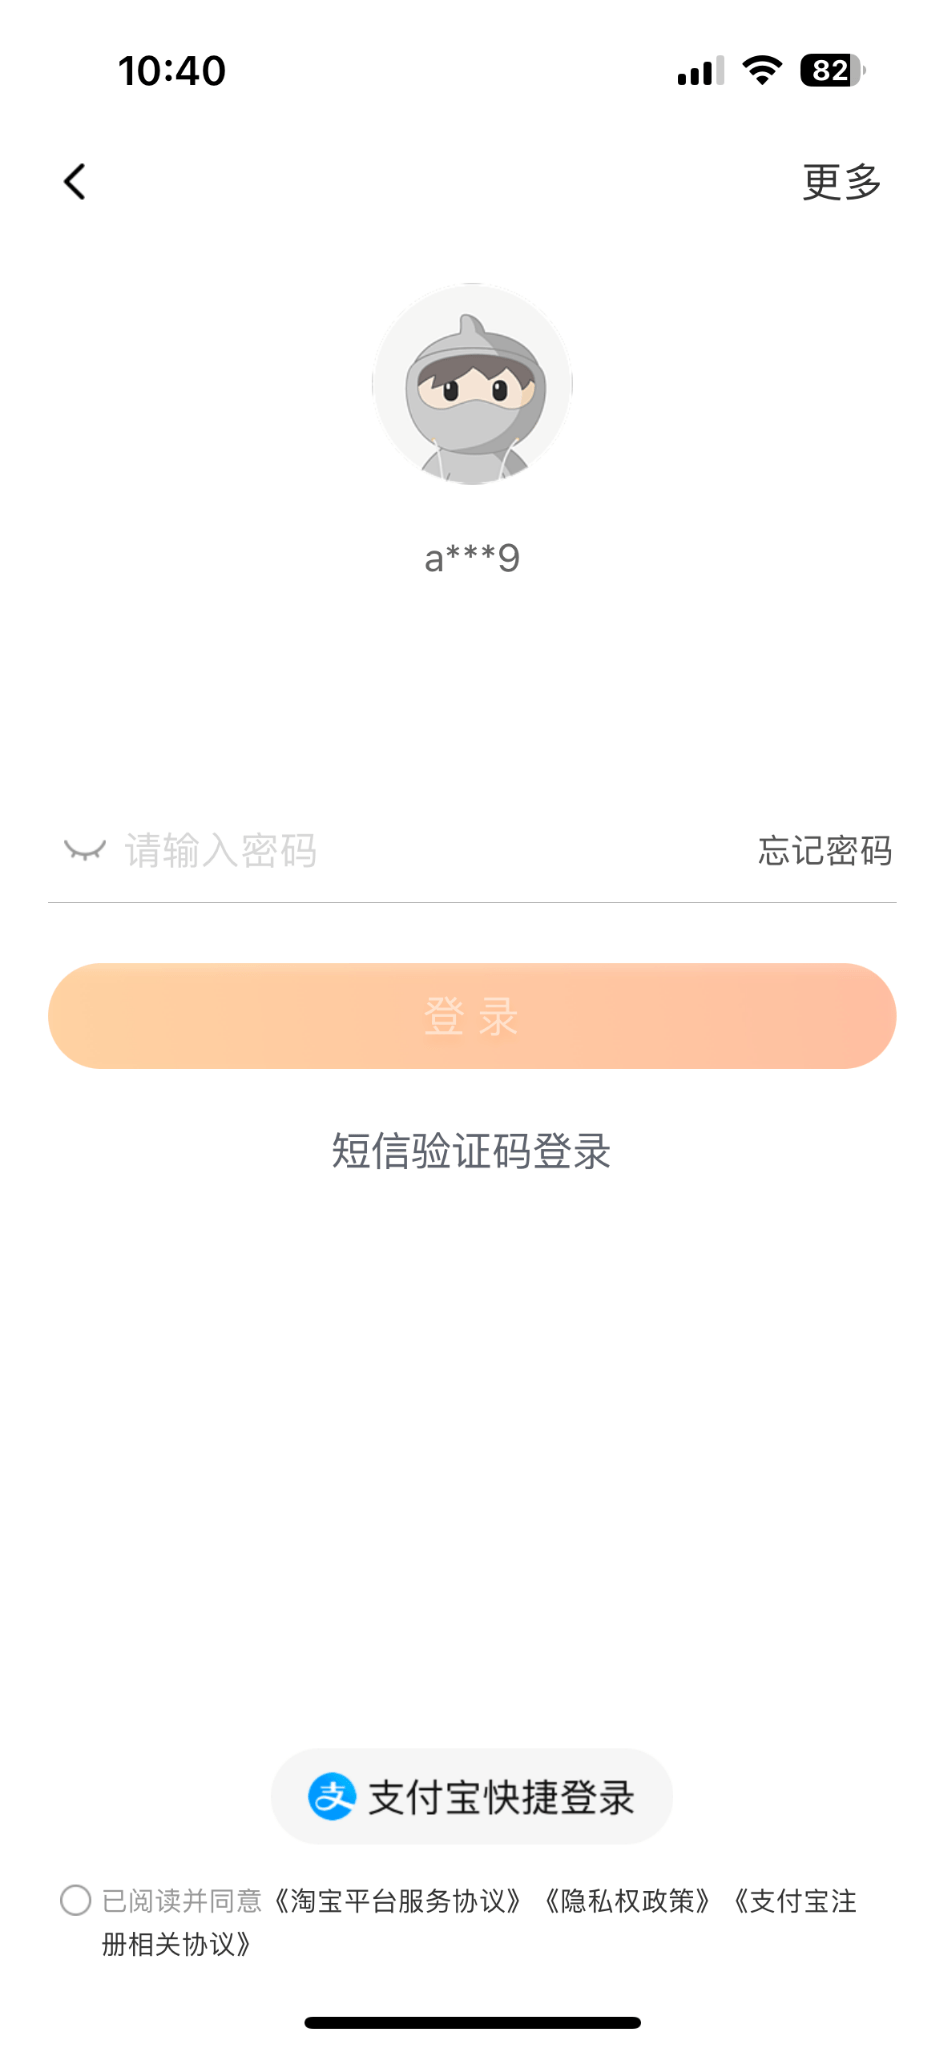 Use the forgot password feature on mobile to fix Taobao login problem